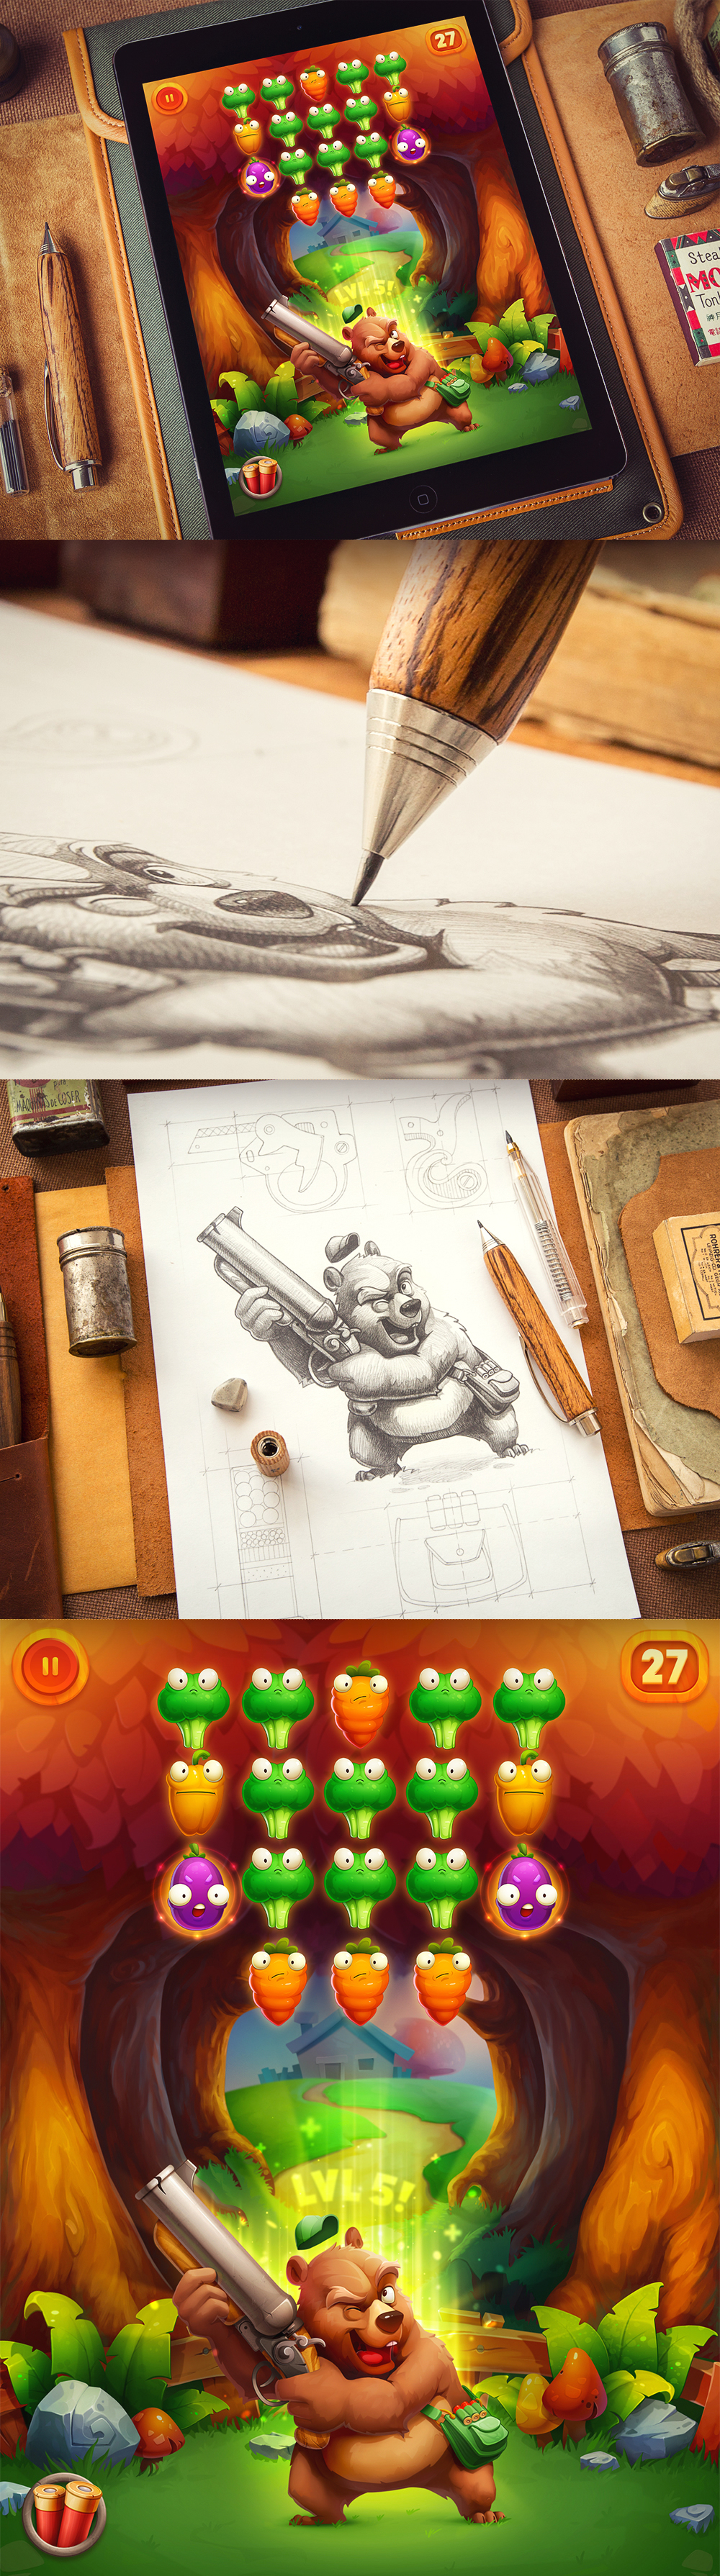 ios game sketch Character design bakery card Interface concept cafe iPad forest menu